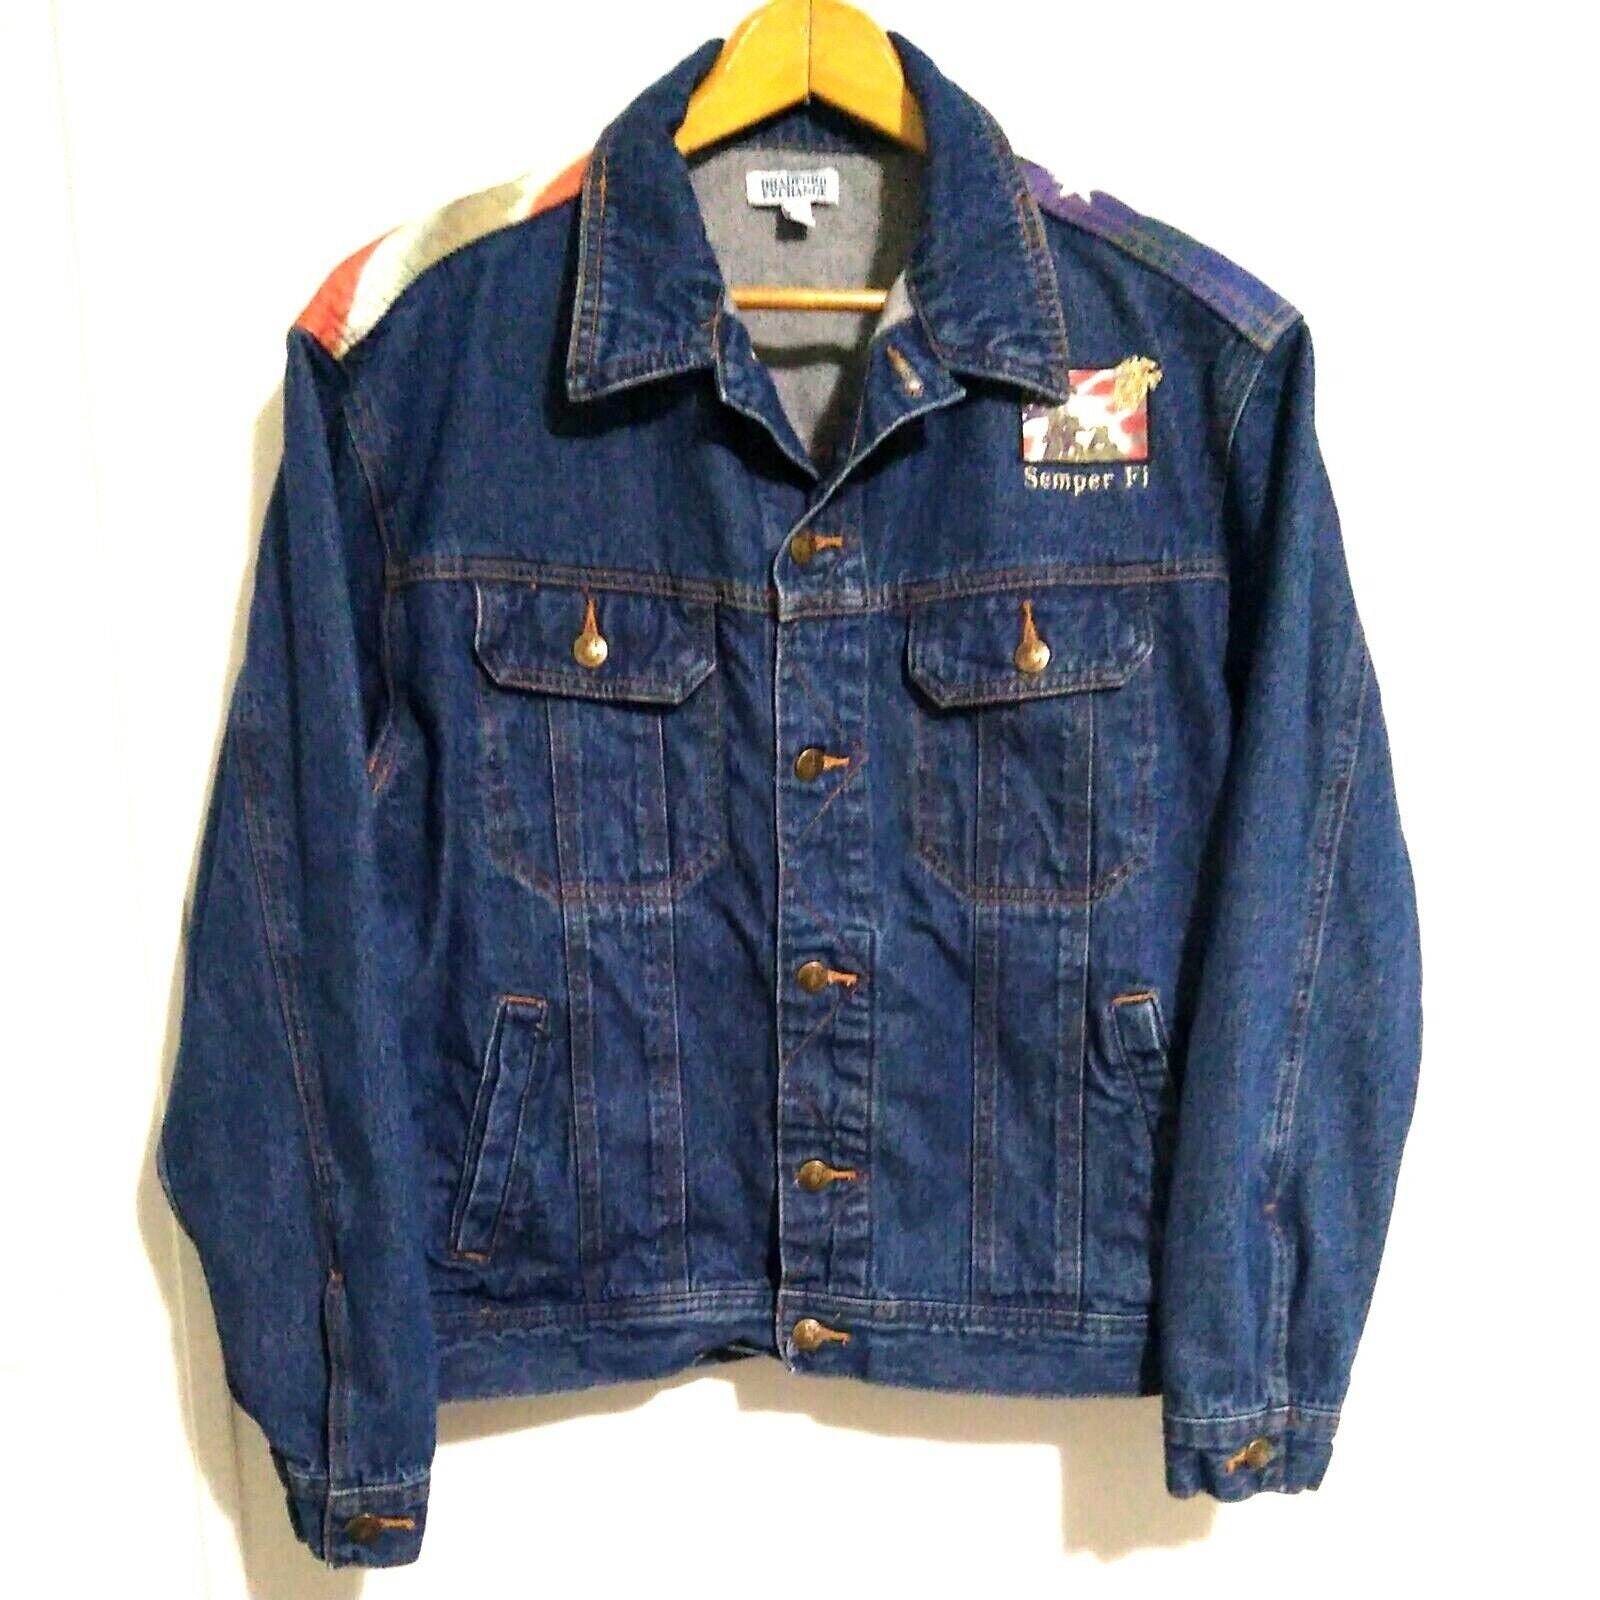 Kid's Varsity Jacket Ultramarine Blue Wool and Cashmere with White  Technical Fabric